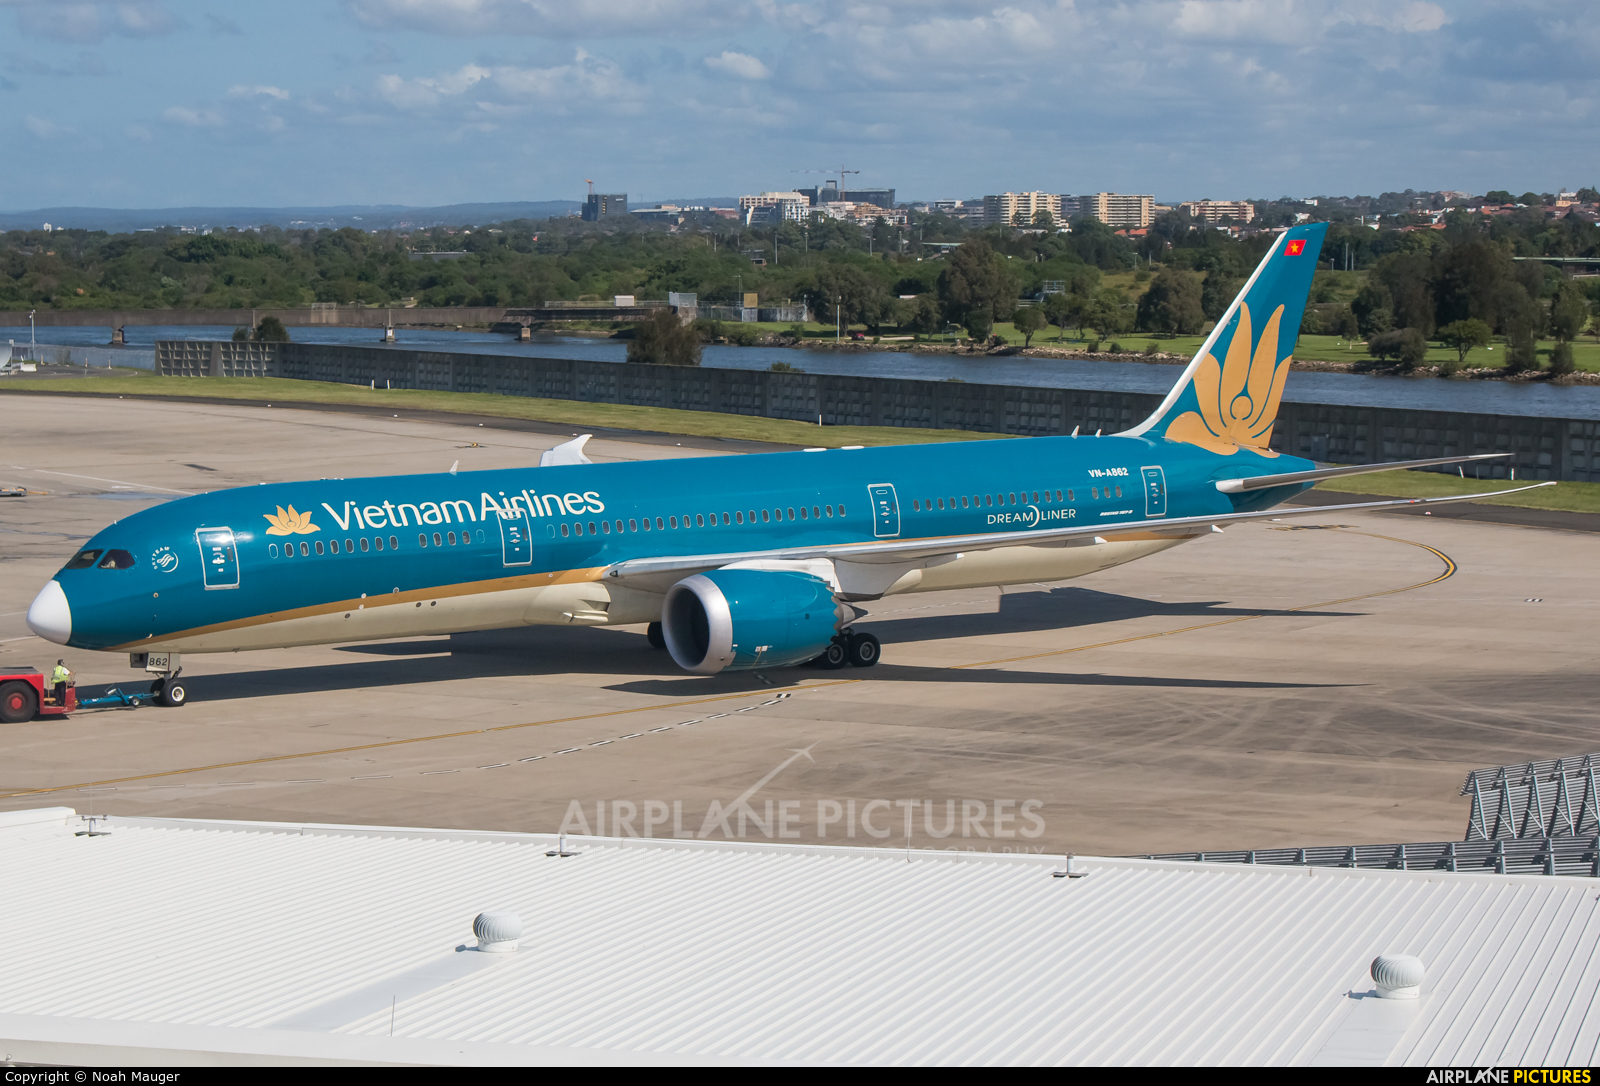 Vietnam Airlines VN-A862 aircraft at Sydney - Kingsford Smith Intl, NSW